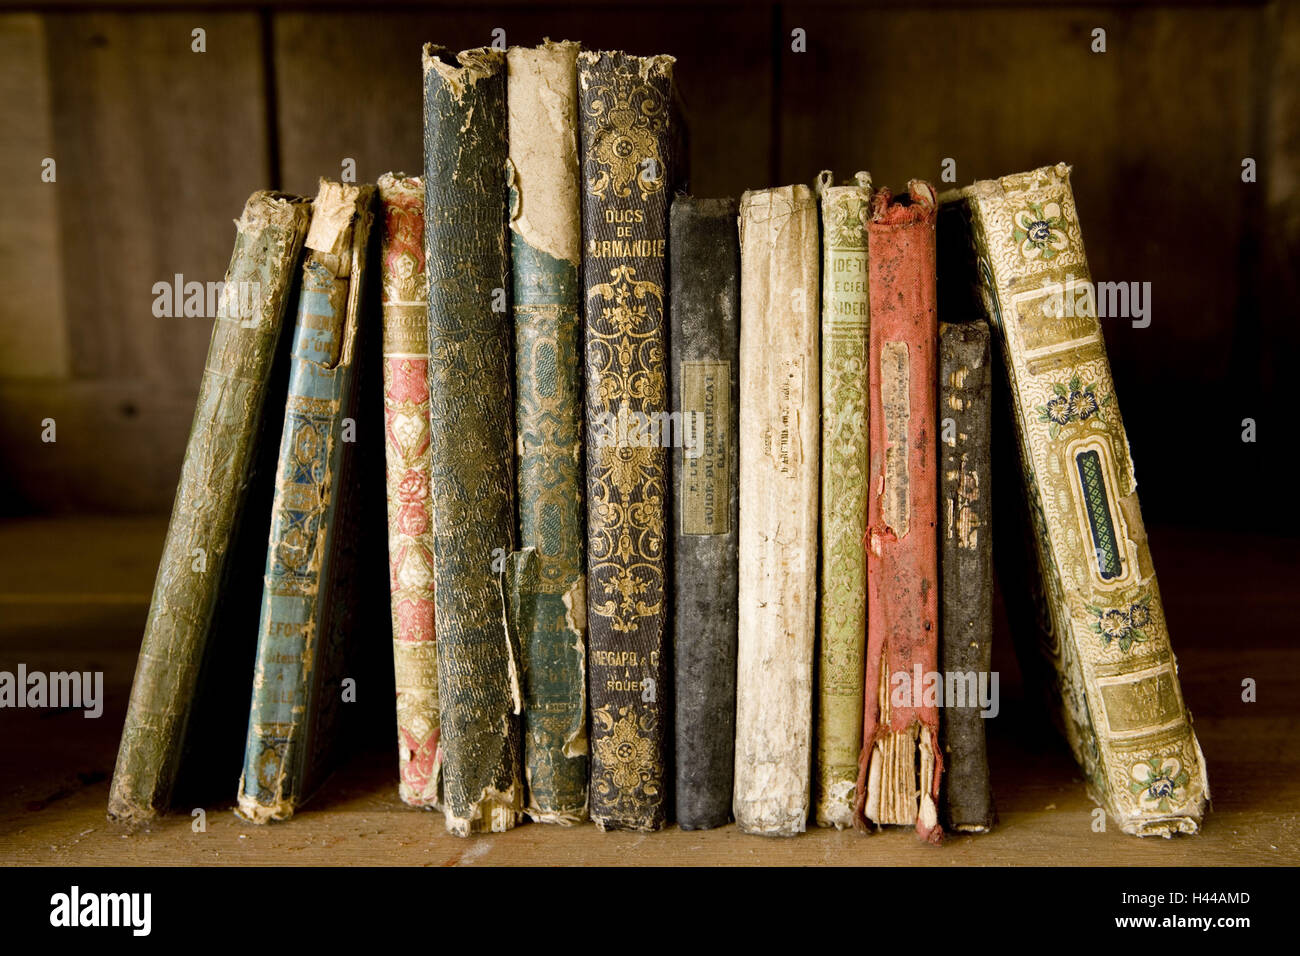 Books, old, antique, spine, damages, Stock Photo